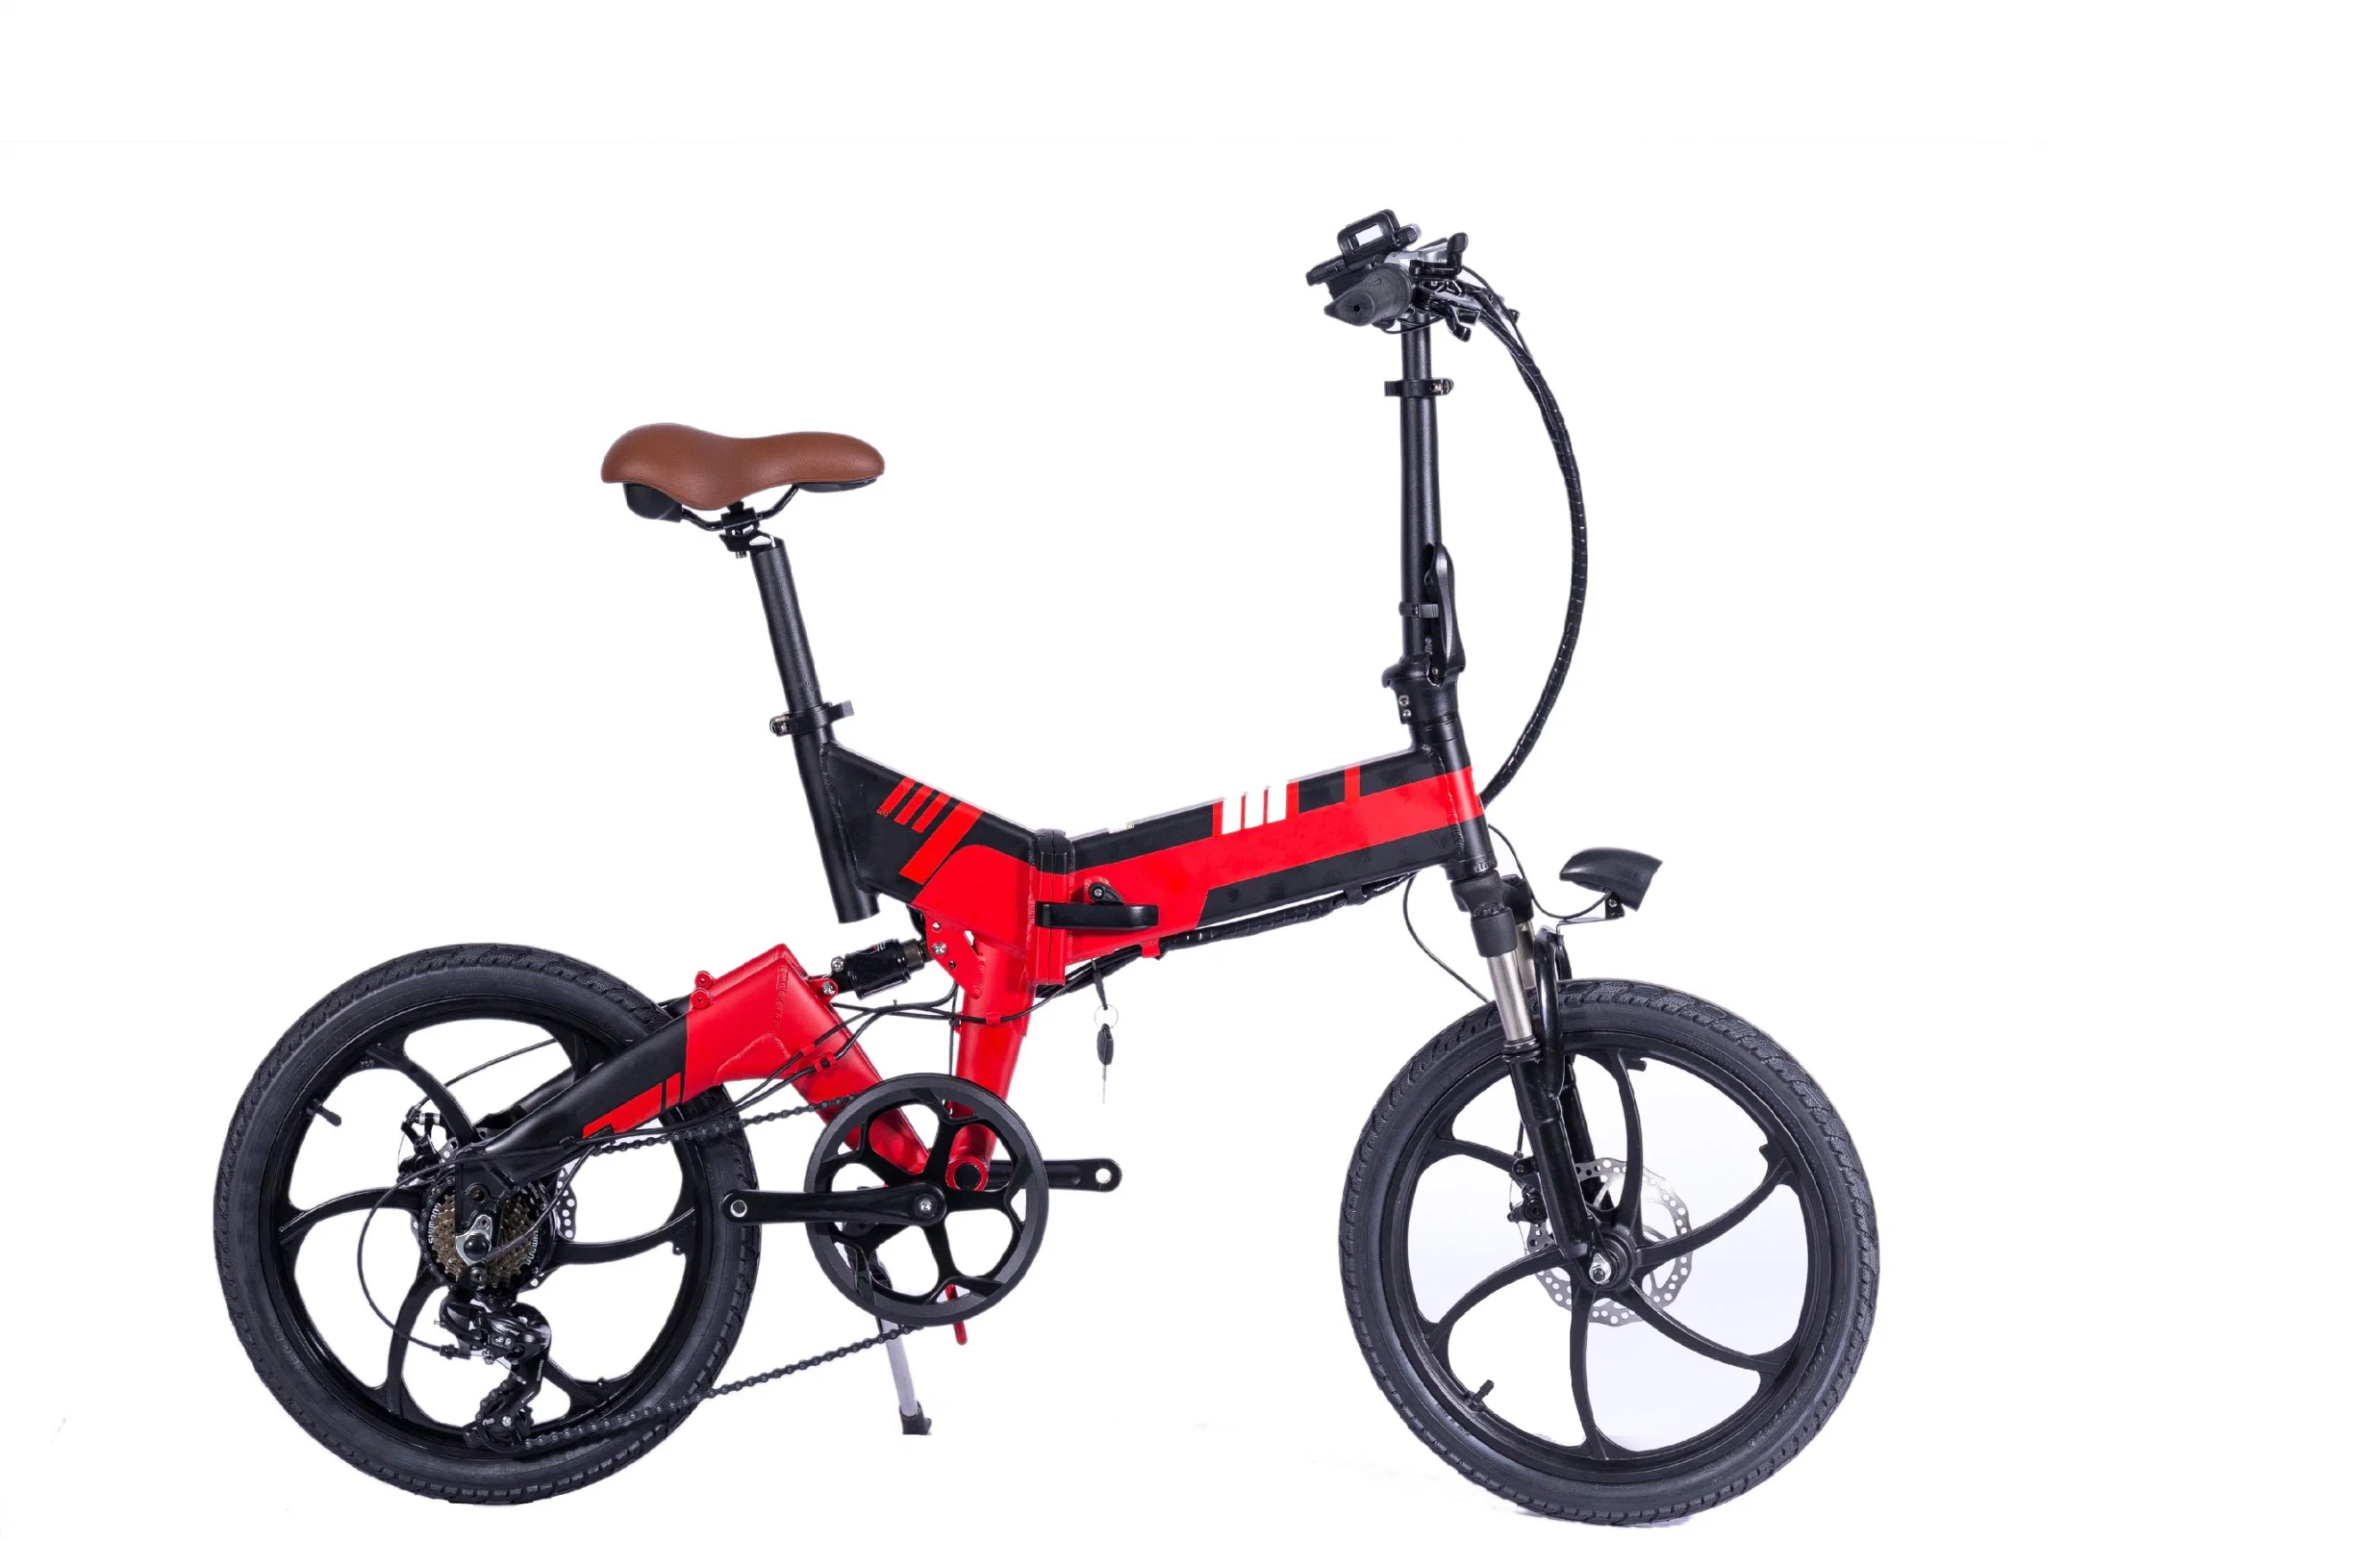 26inch Motorcycle Electric Scooter Bicycle Electric Bike Electric Motorcycle Scooter Motor Scooter Hybird Bike Electric Cargo Bike 48V 10ah Battery 500W Eb-06